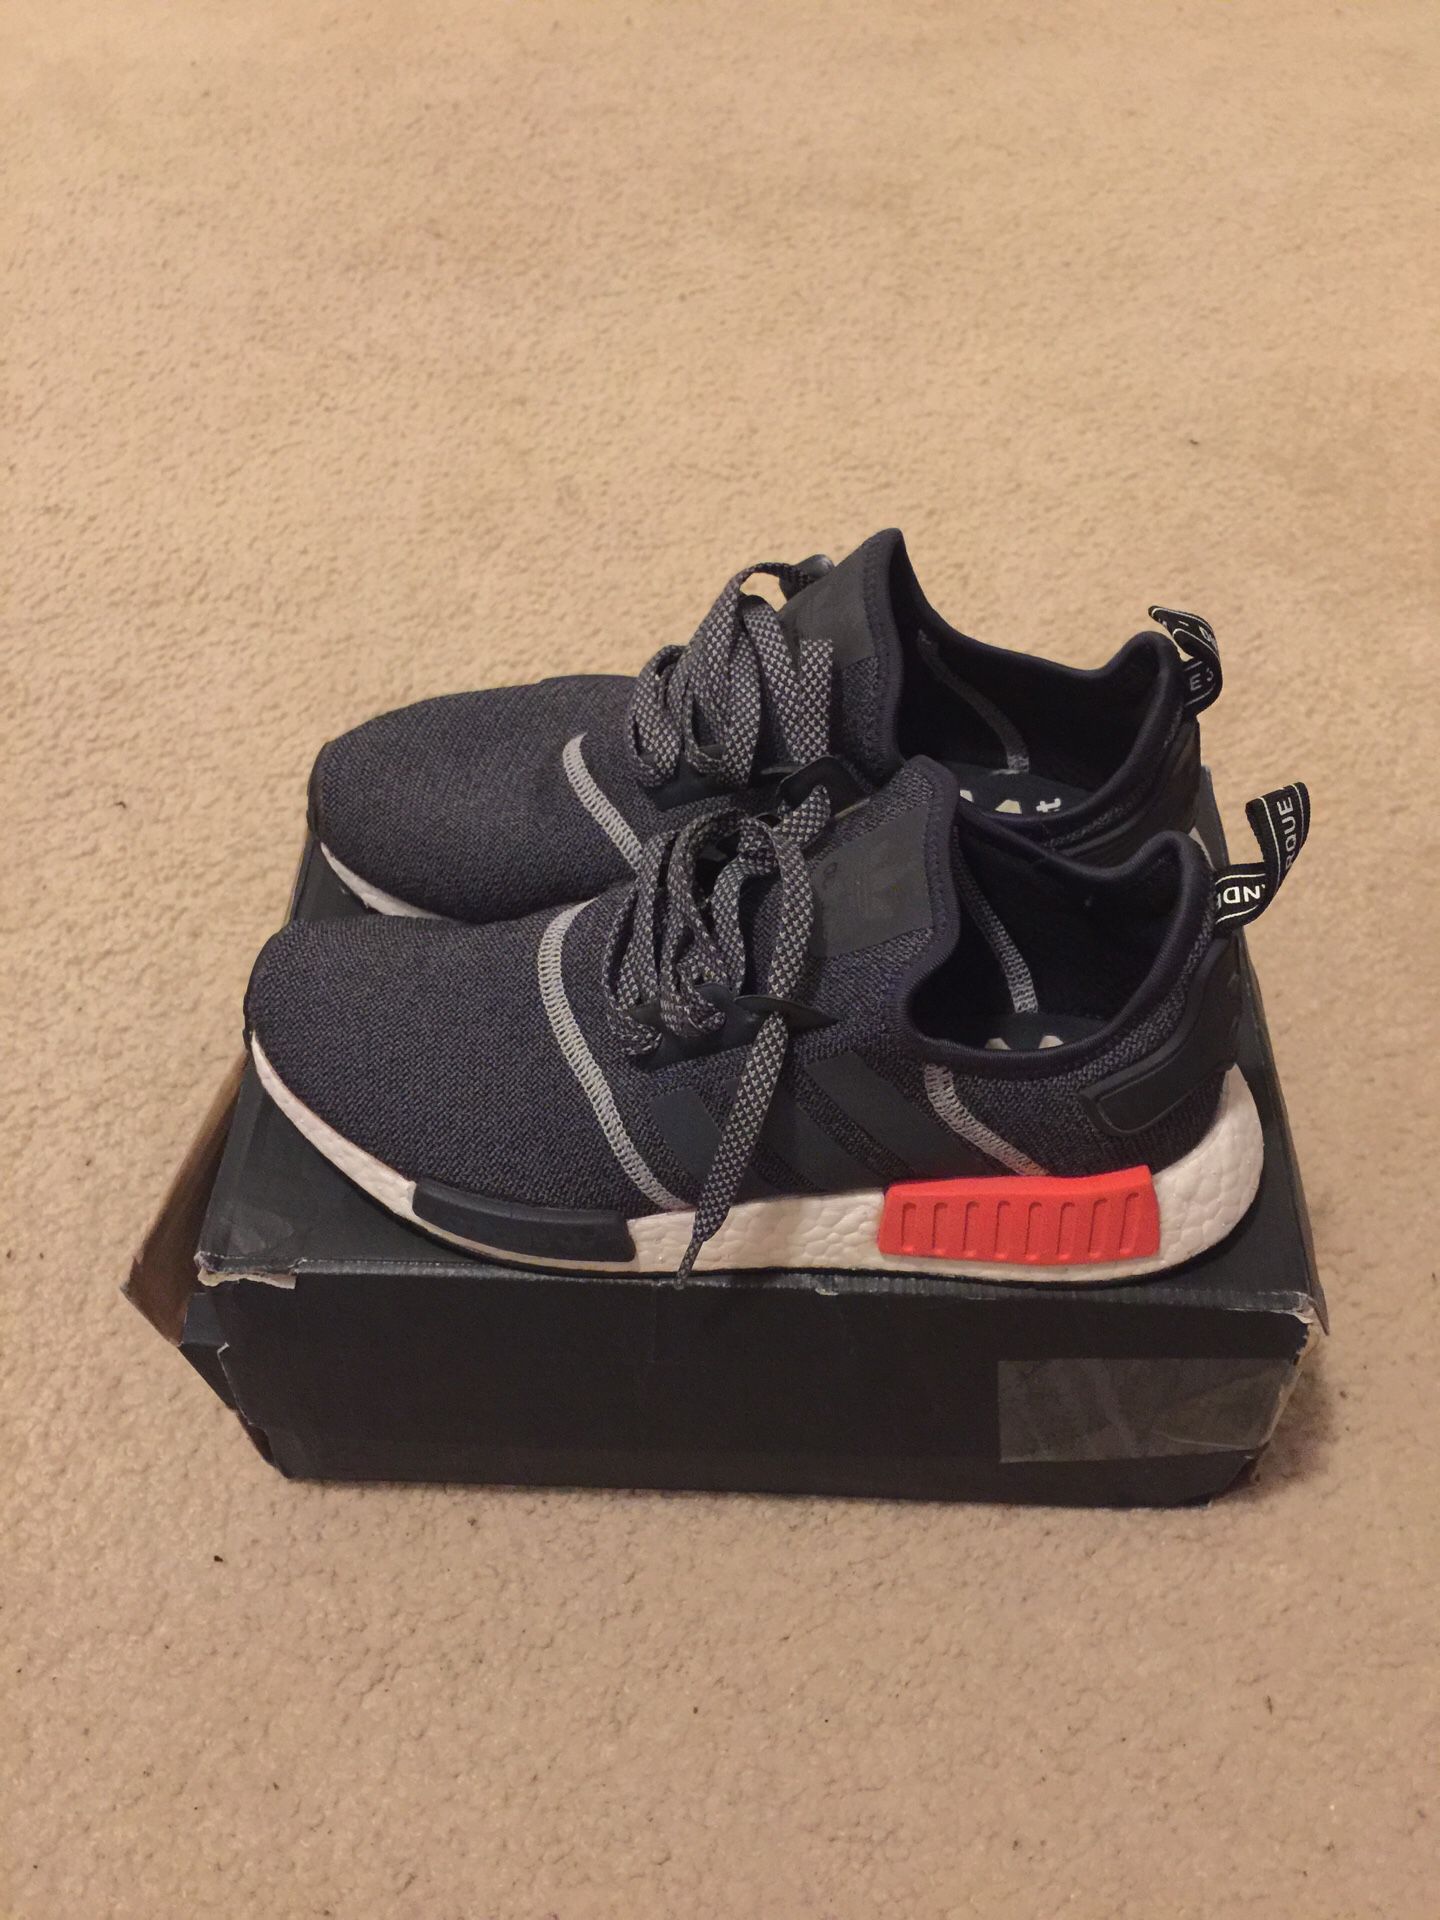 Adidas Nmd’s Size 9 men’s